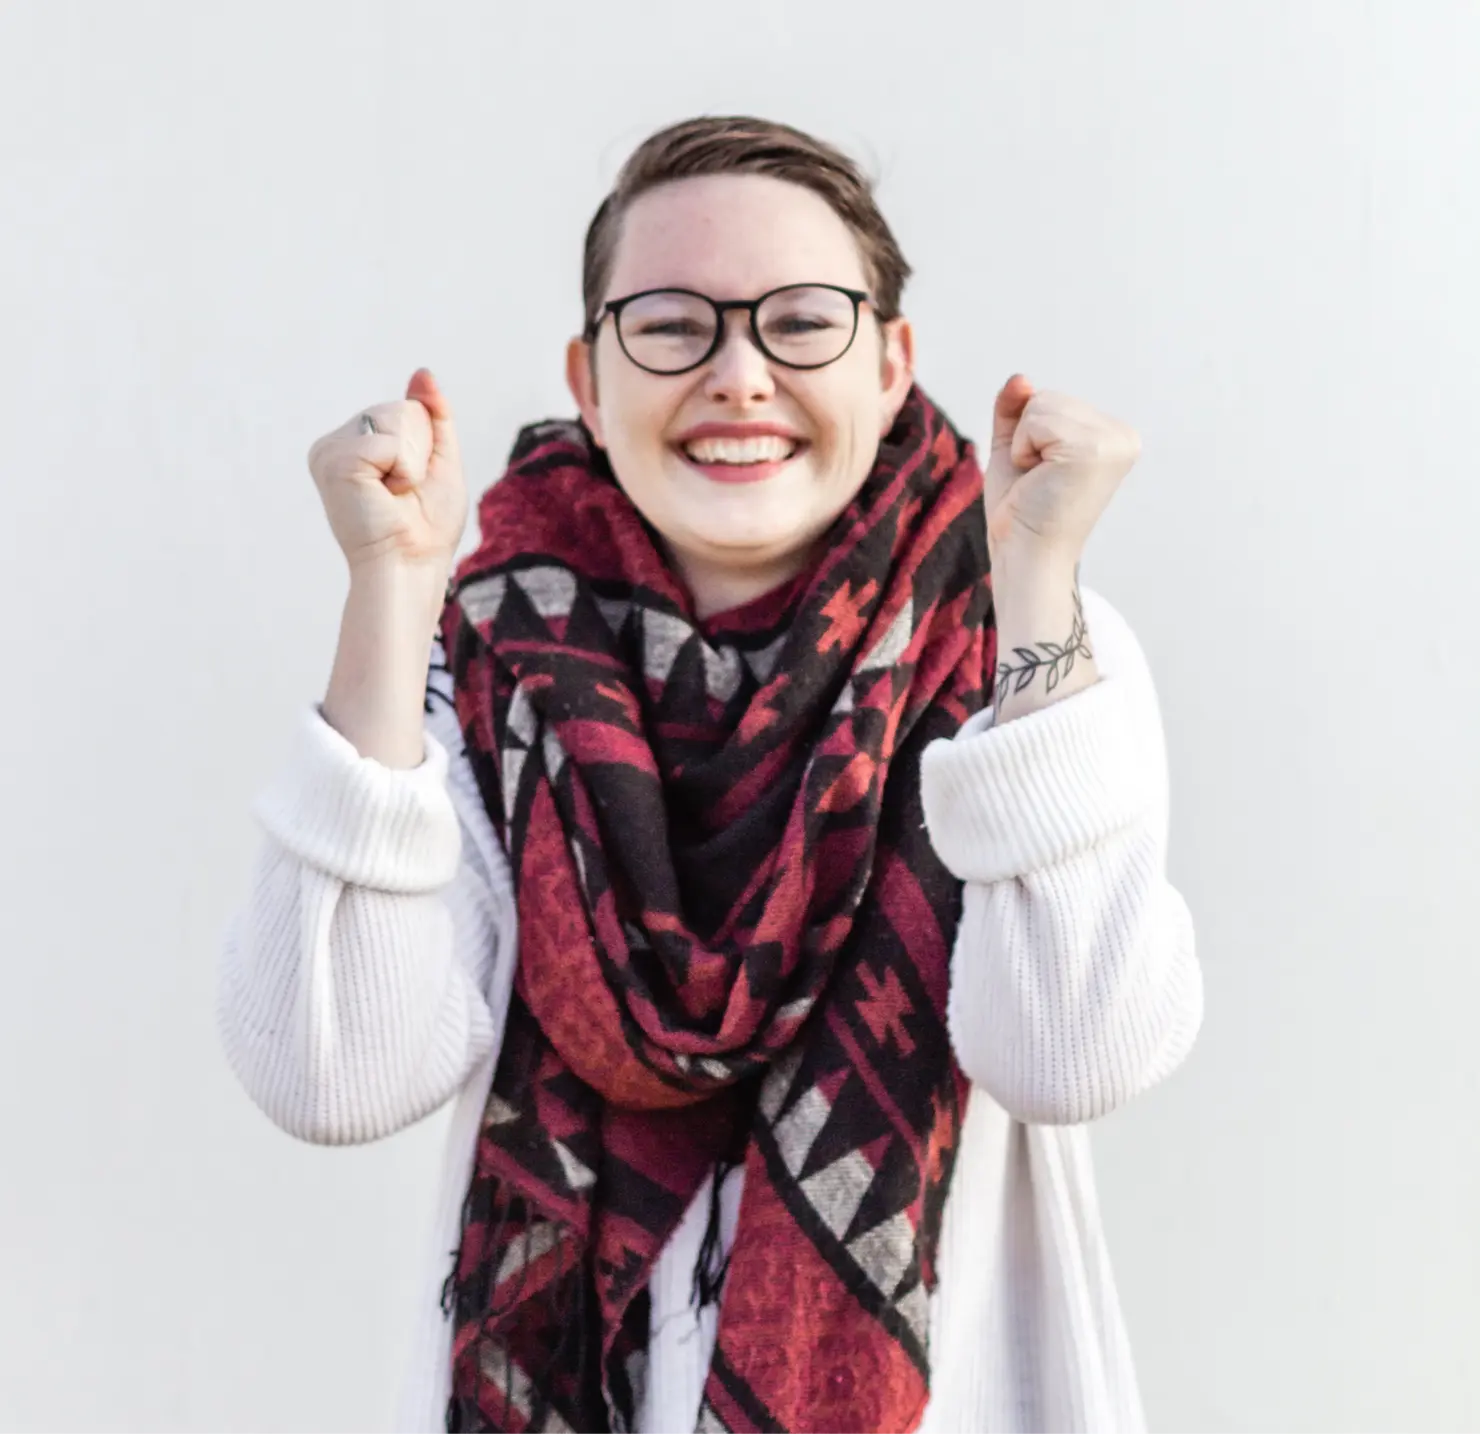 Woman in scarf and glasses and sweater smiling and raising arms in an excited pose